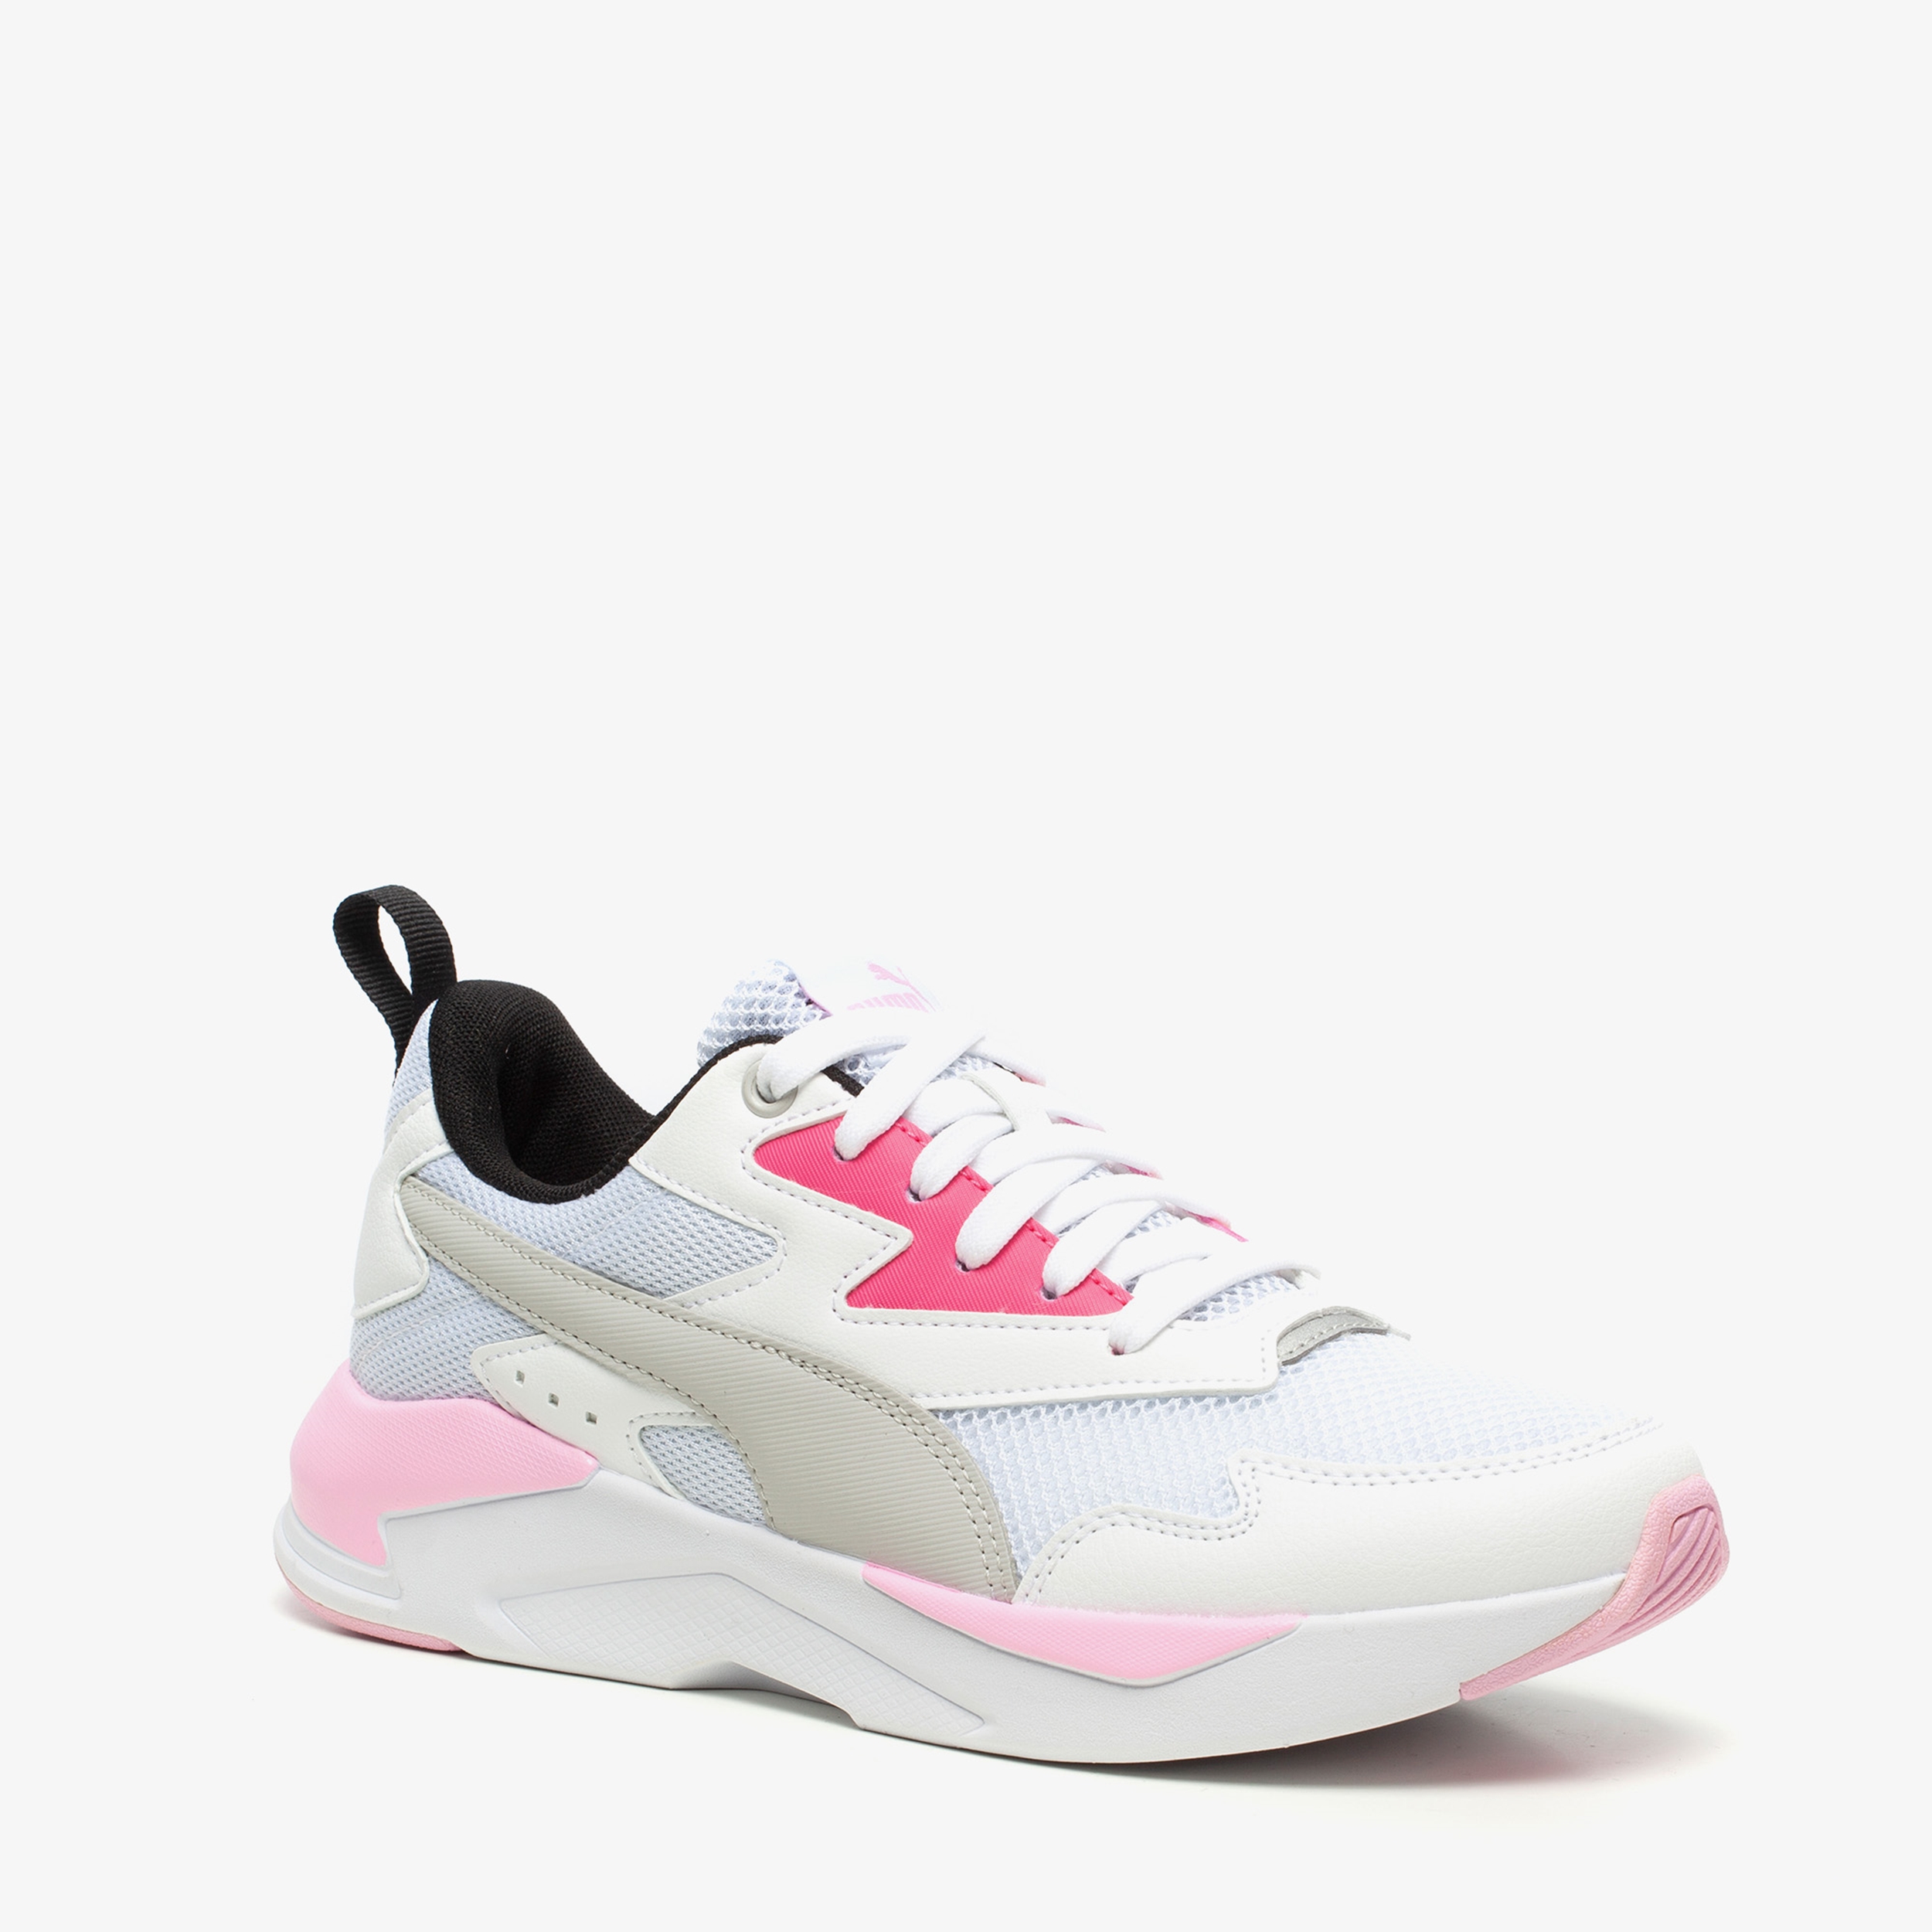 Puma X Ray Lite dad sneakers online 